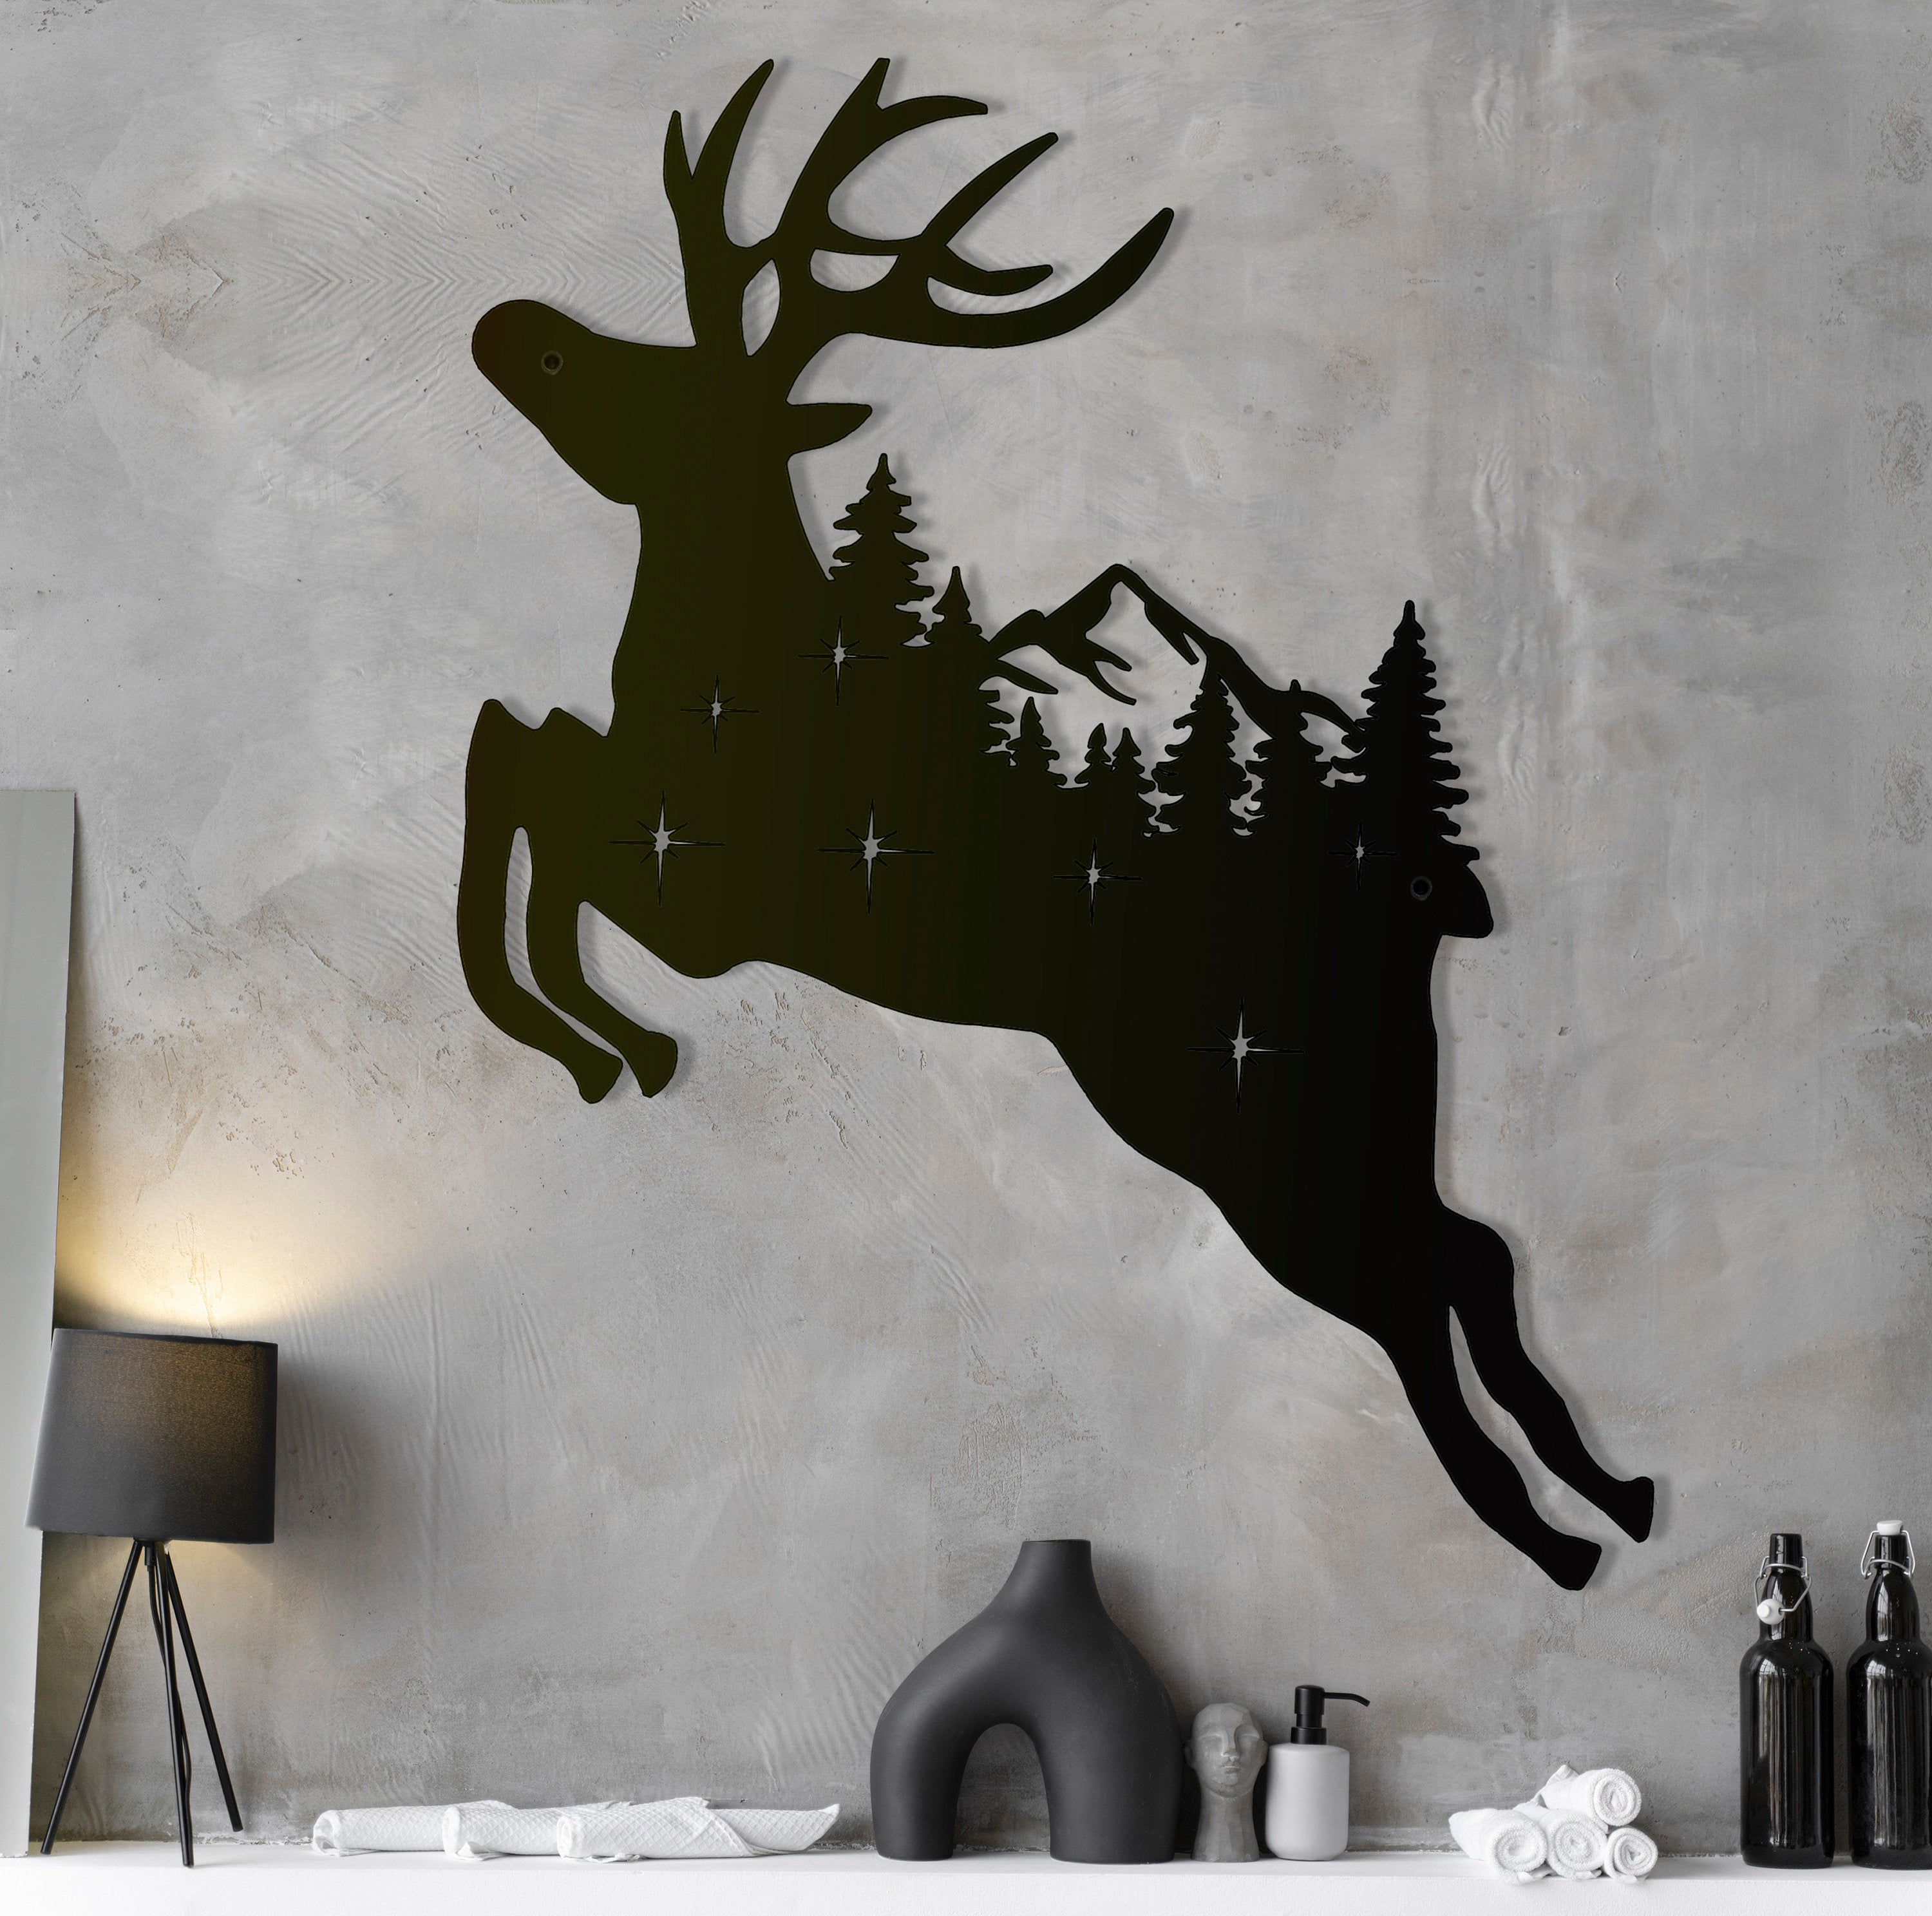 Deer Decor, Christmas Decor, Unique Wall Decor, Living Room Decoration, Housewarming Gift, Gift For Her, Girlfriend Gift, Metal Wall Decor